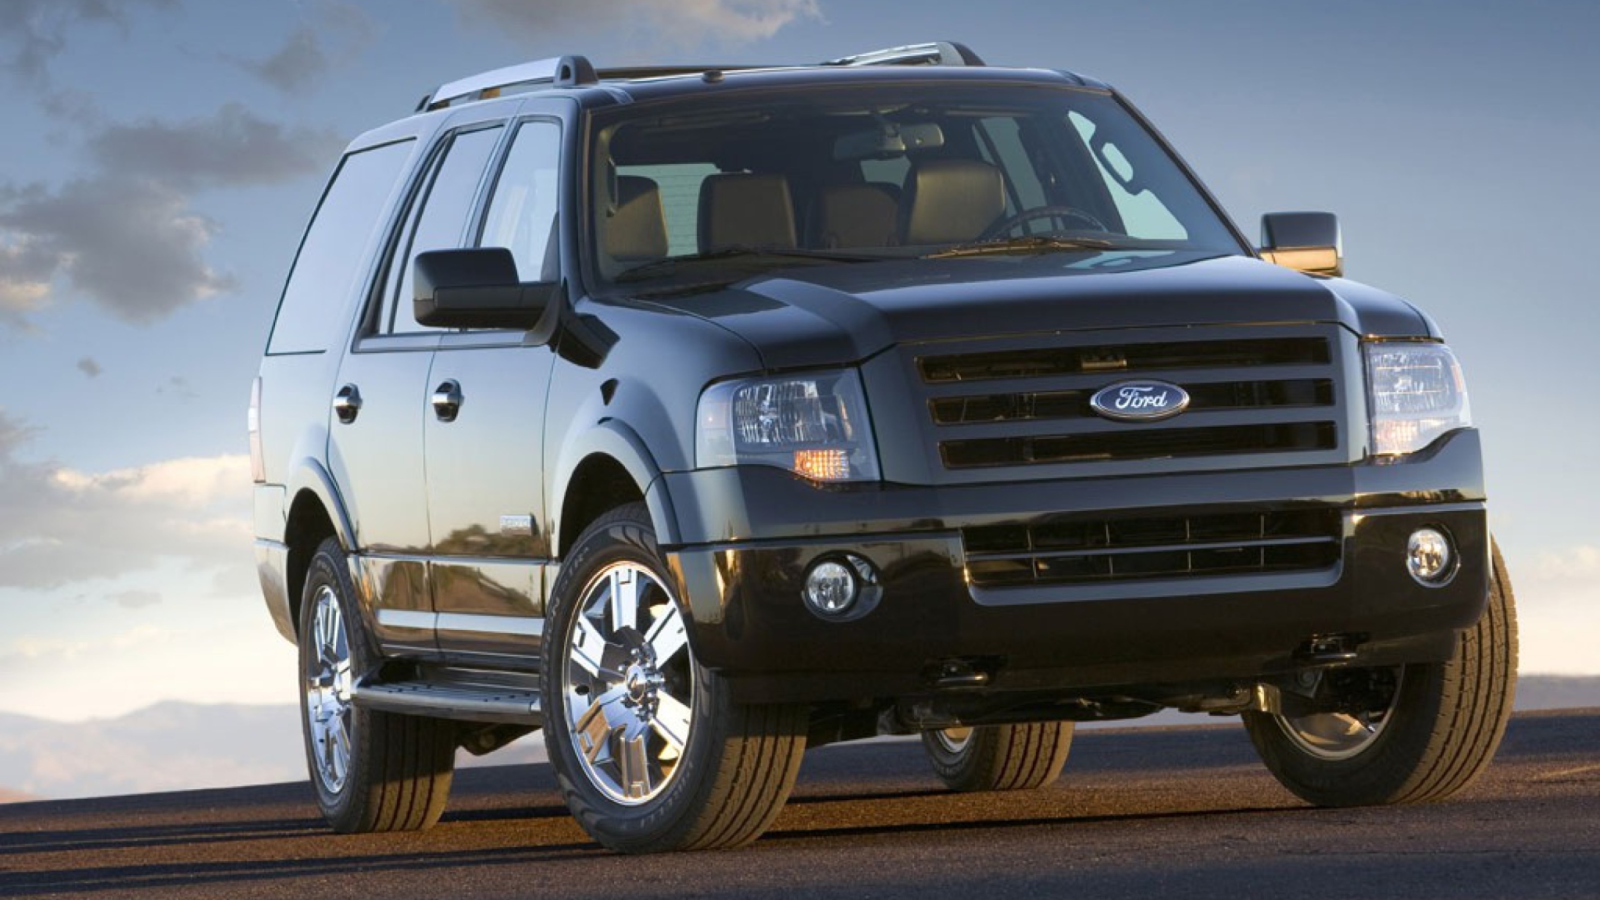 Ford Expedition wallpaper 1600x900